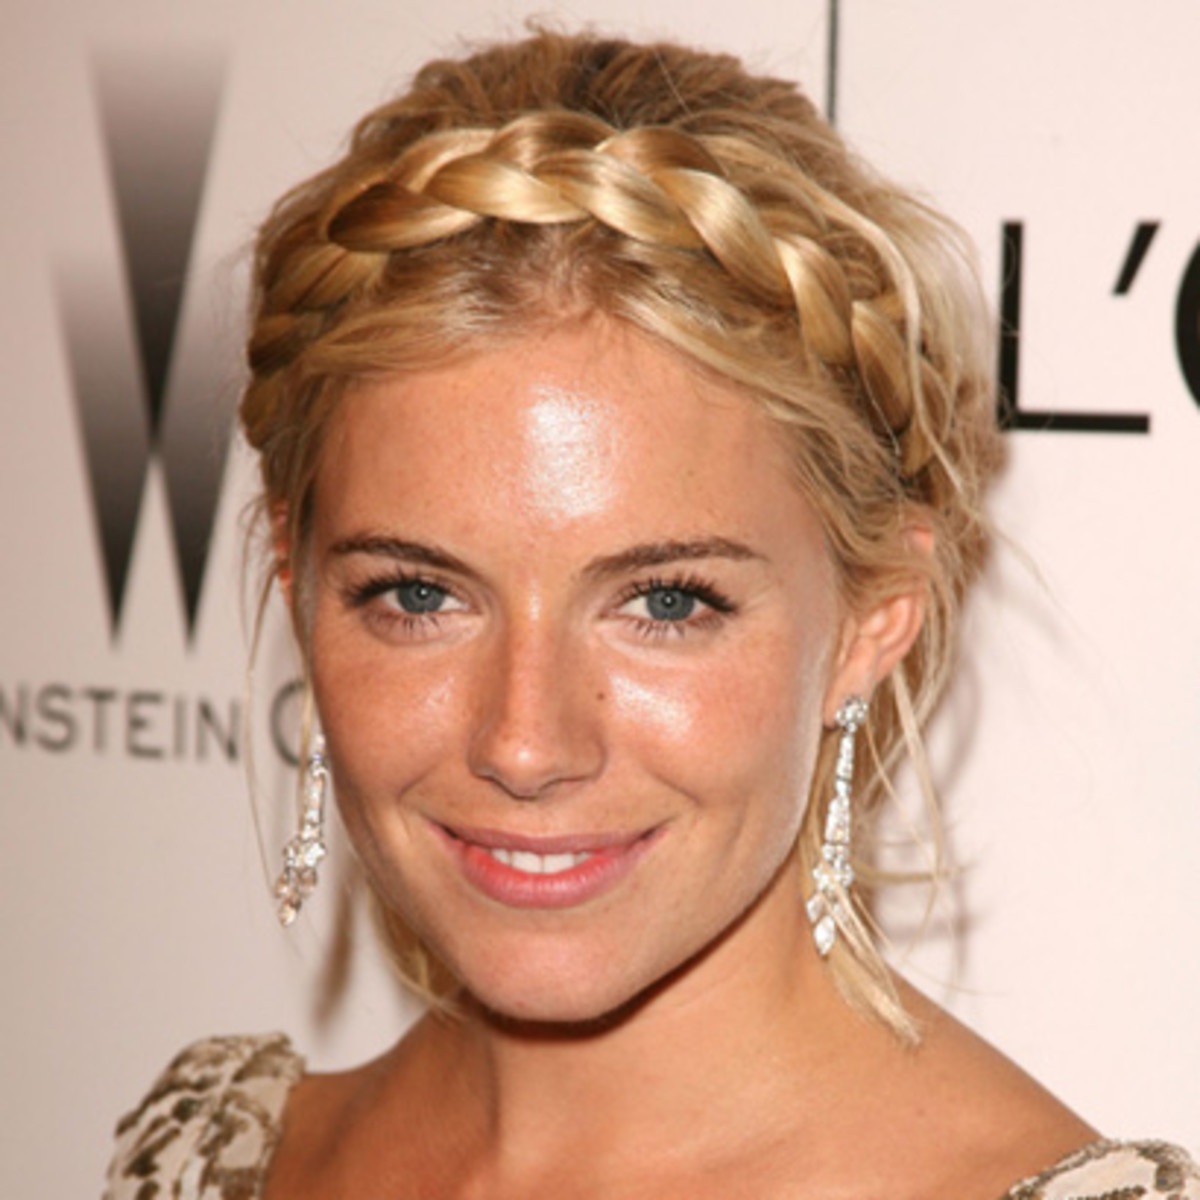 Best Braids Hairstyle for Your Face Shape (Women's Edition)